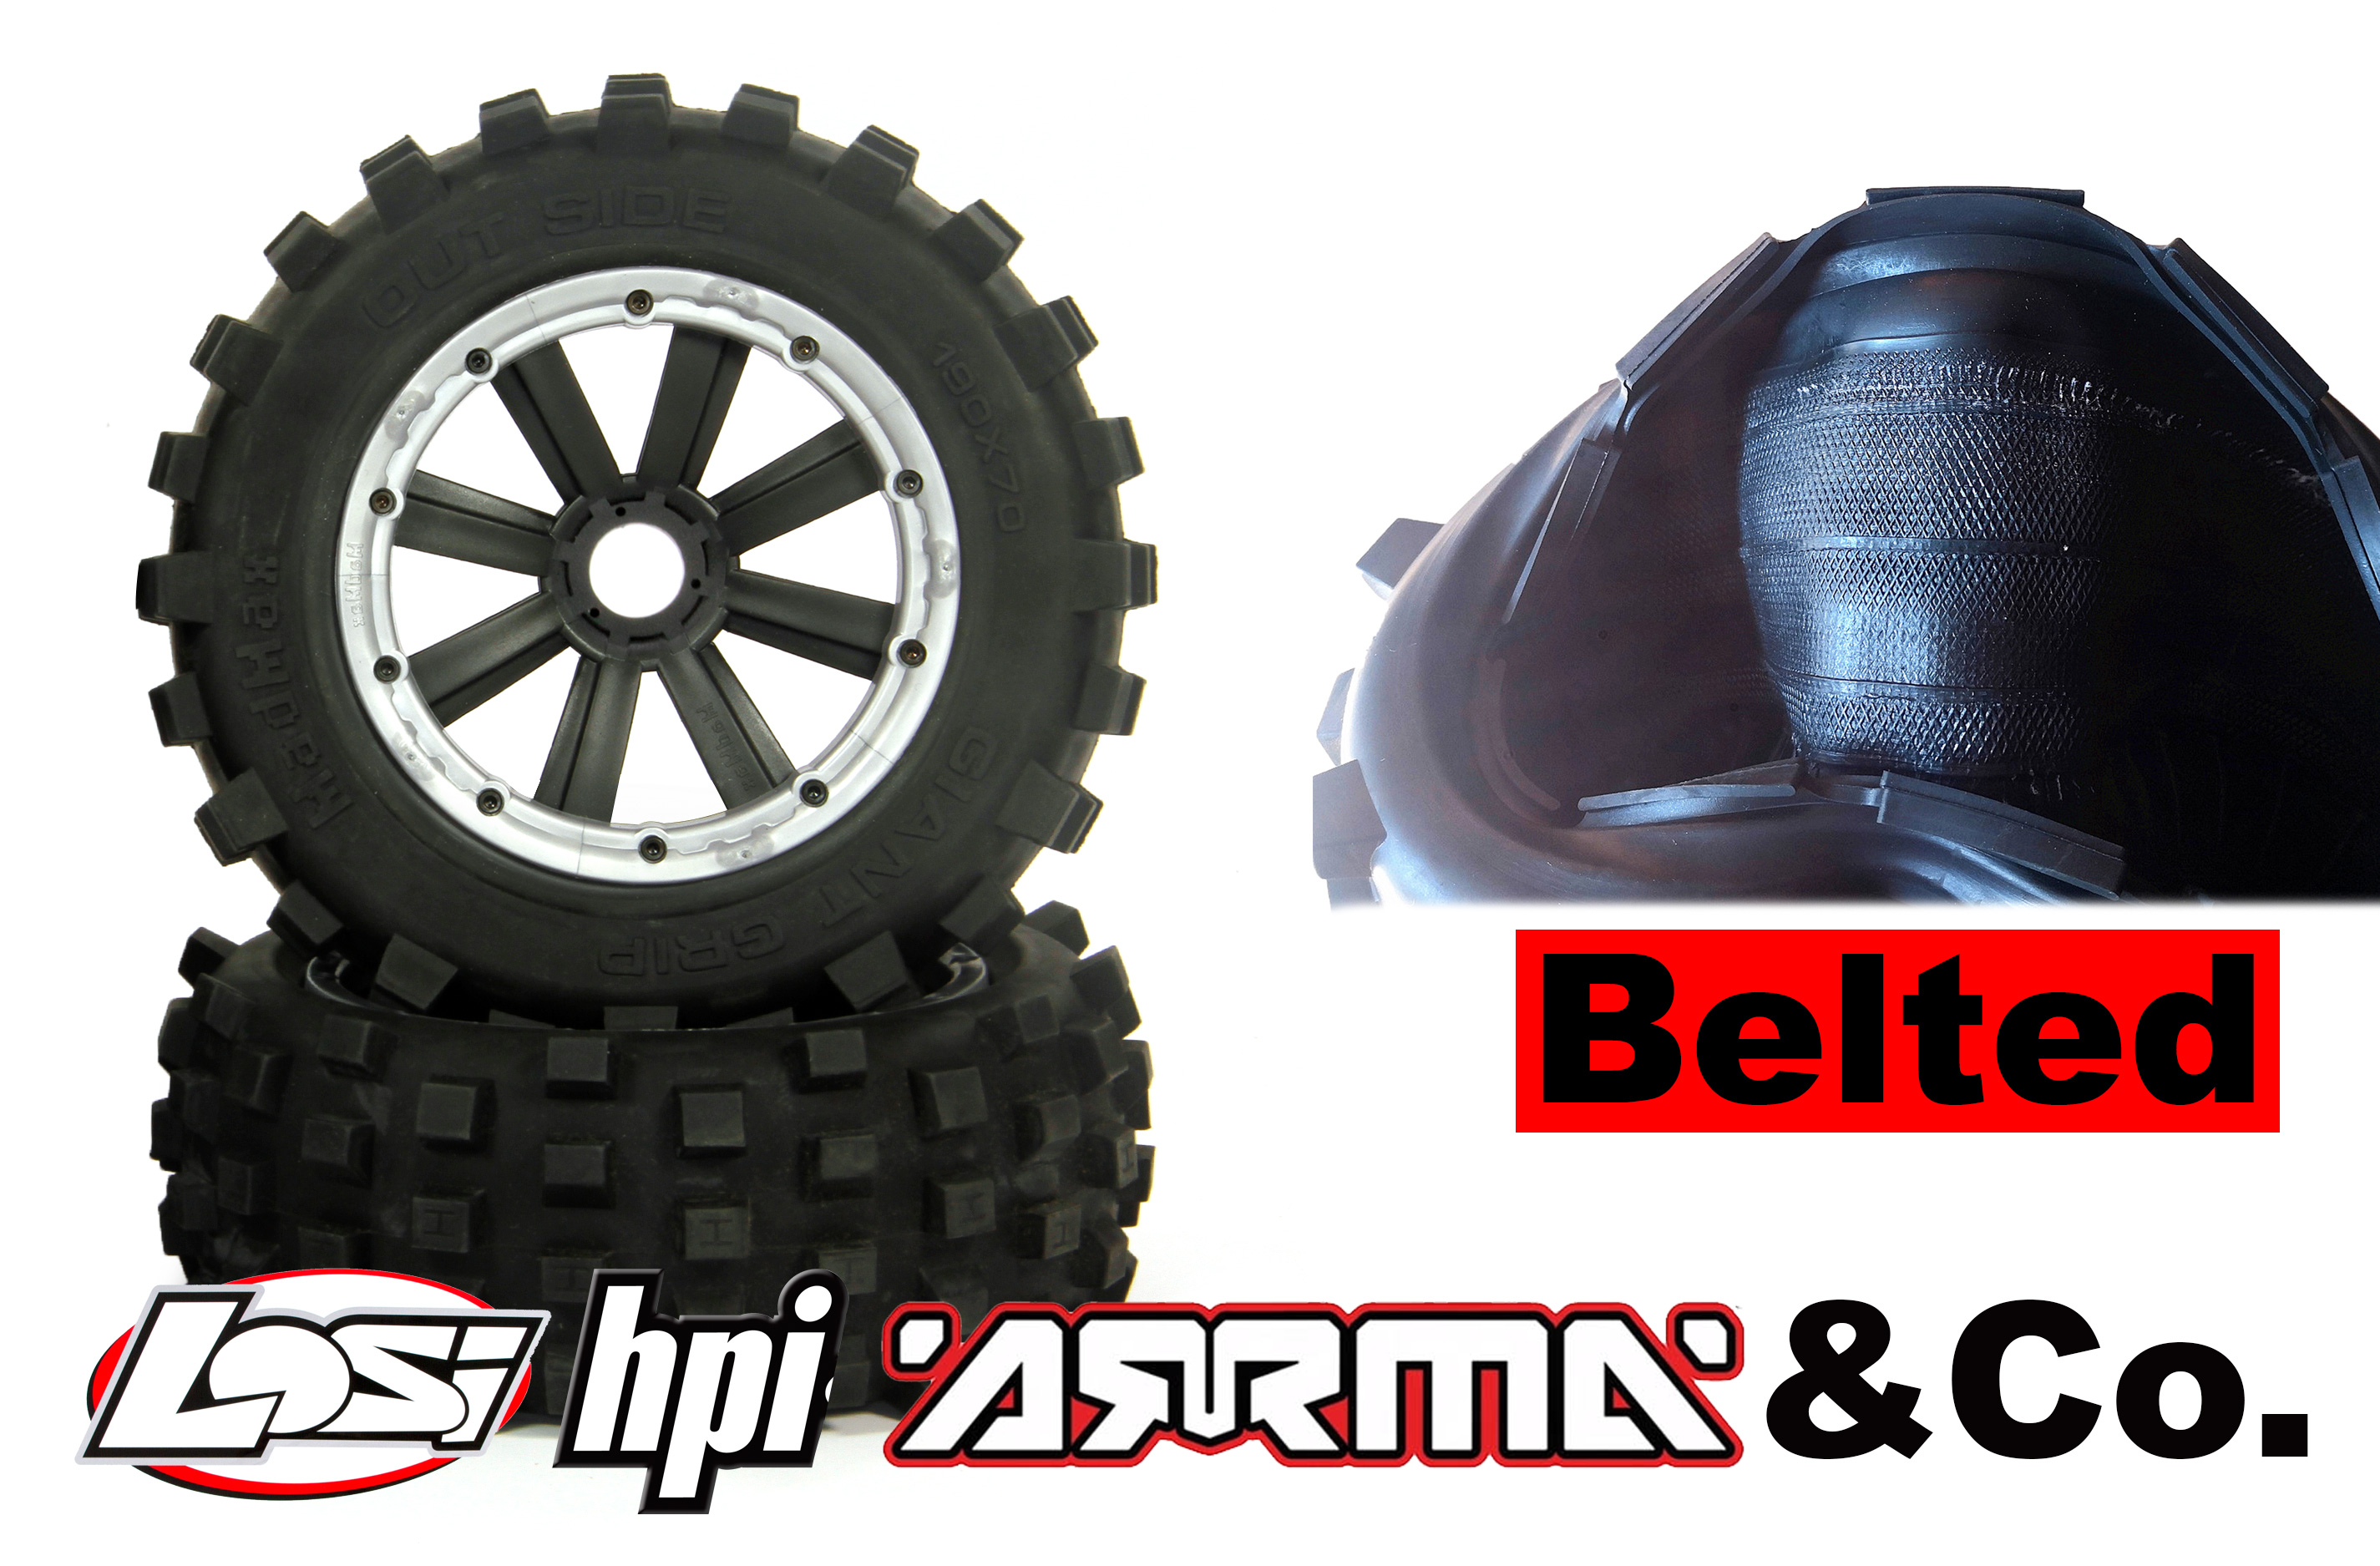 y1409/100B GIANT GRIP tires belted with MadMax Extreme rims/inlays for Losi and HPI Offer